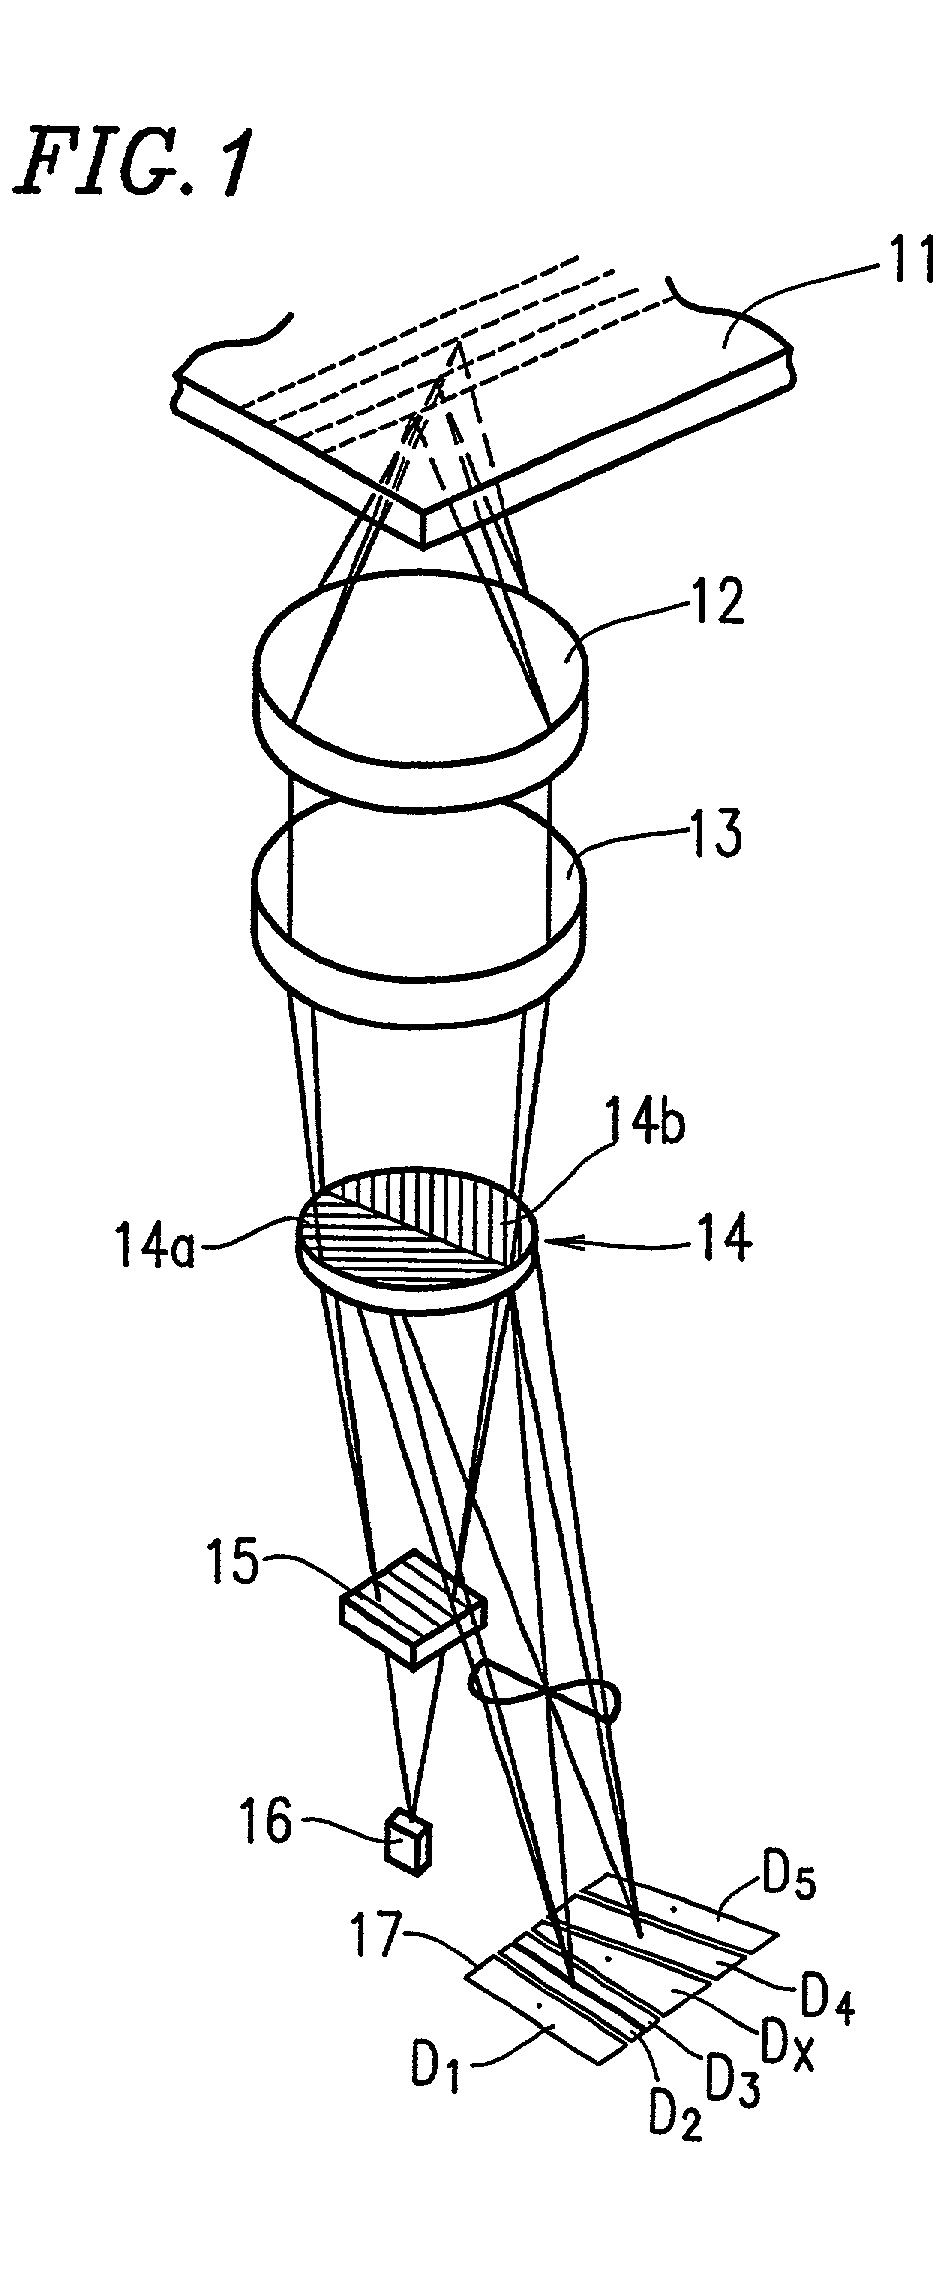 Optical pickup system with light receiving portion